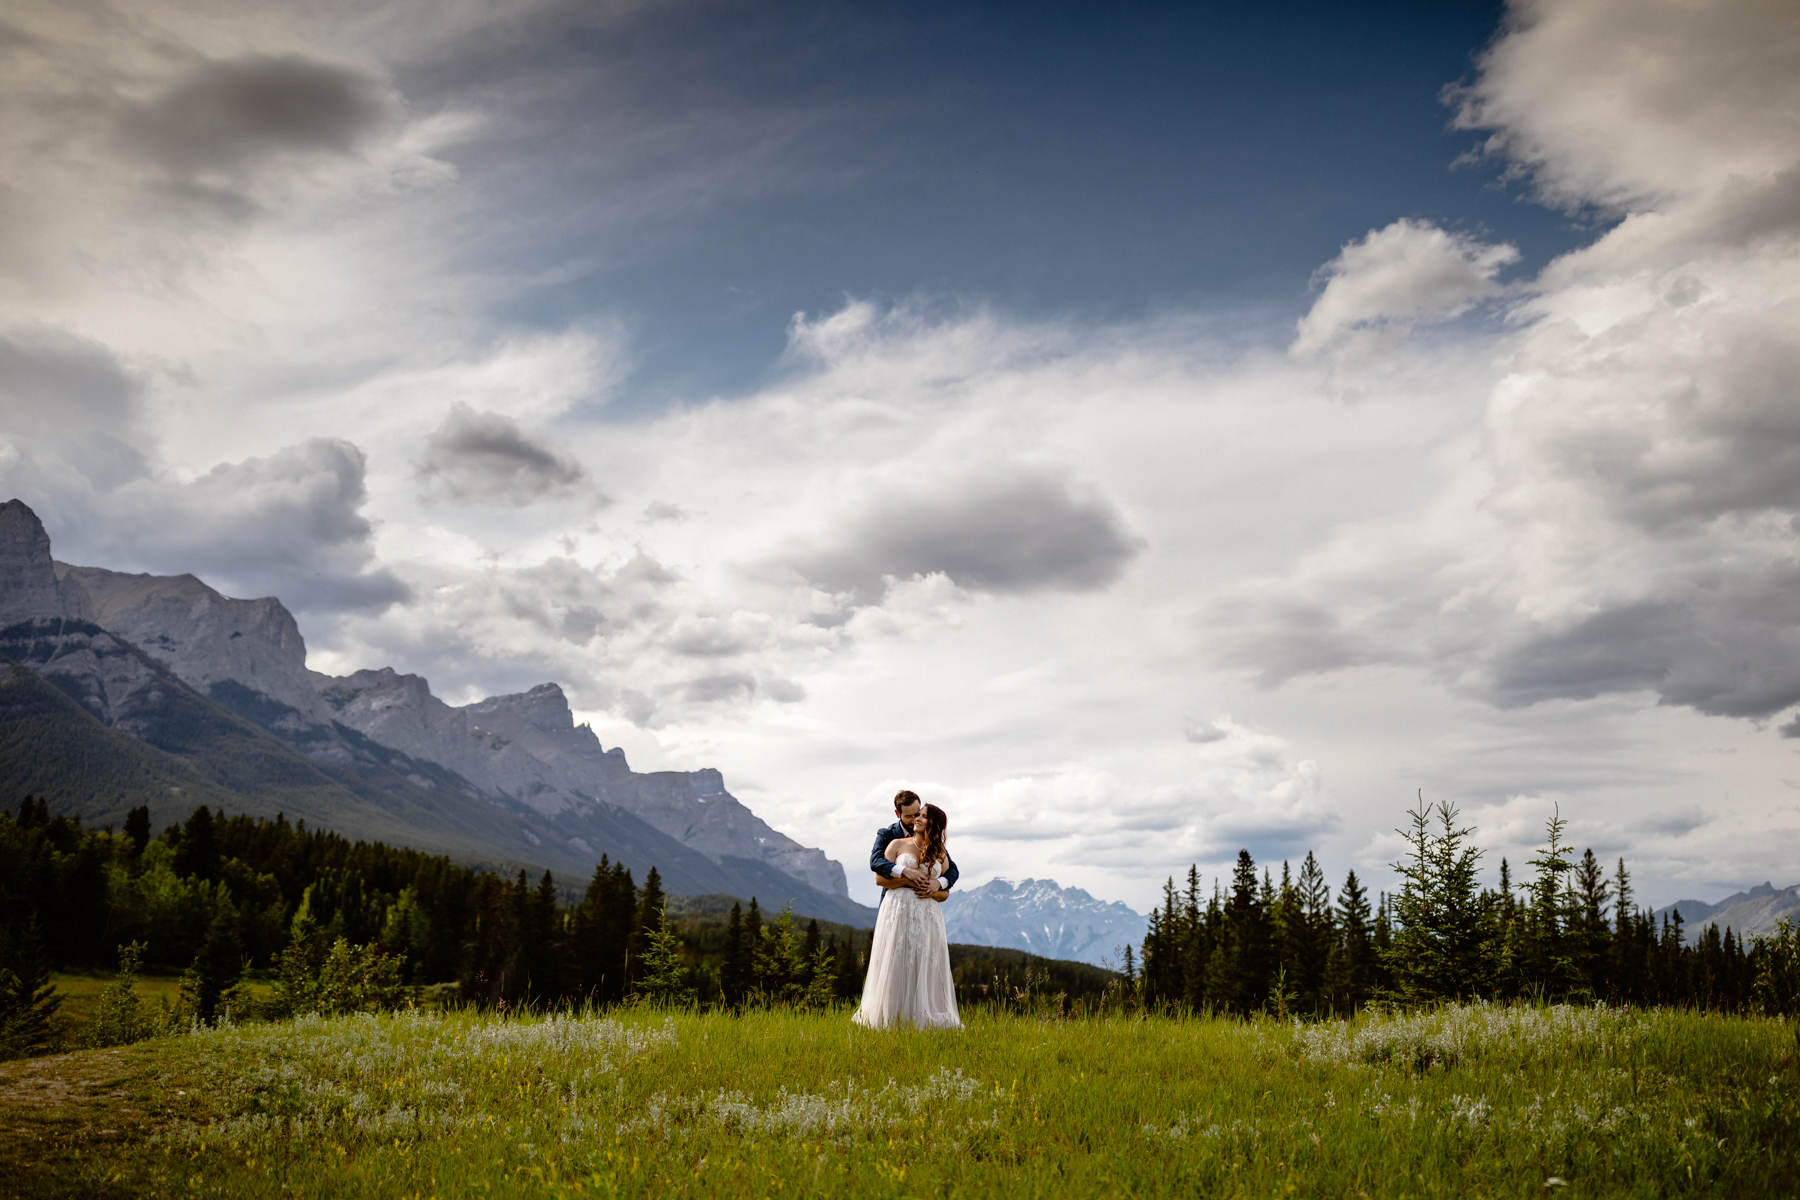 Canmore photographers at a Murrieta's wedding near Spring Creek at sunset